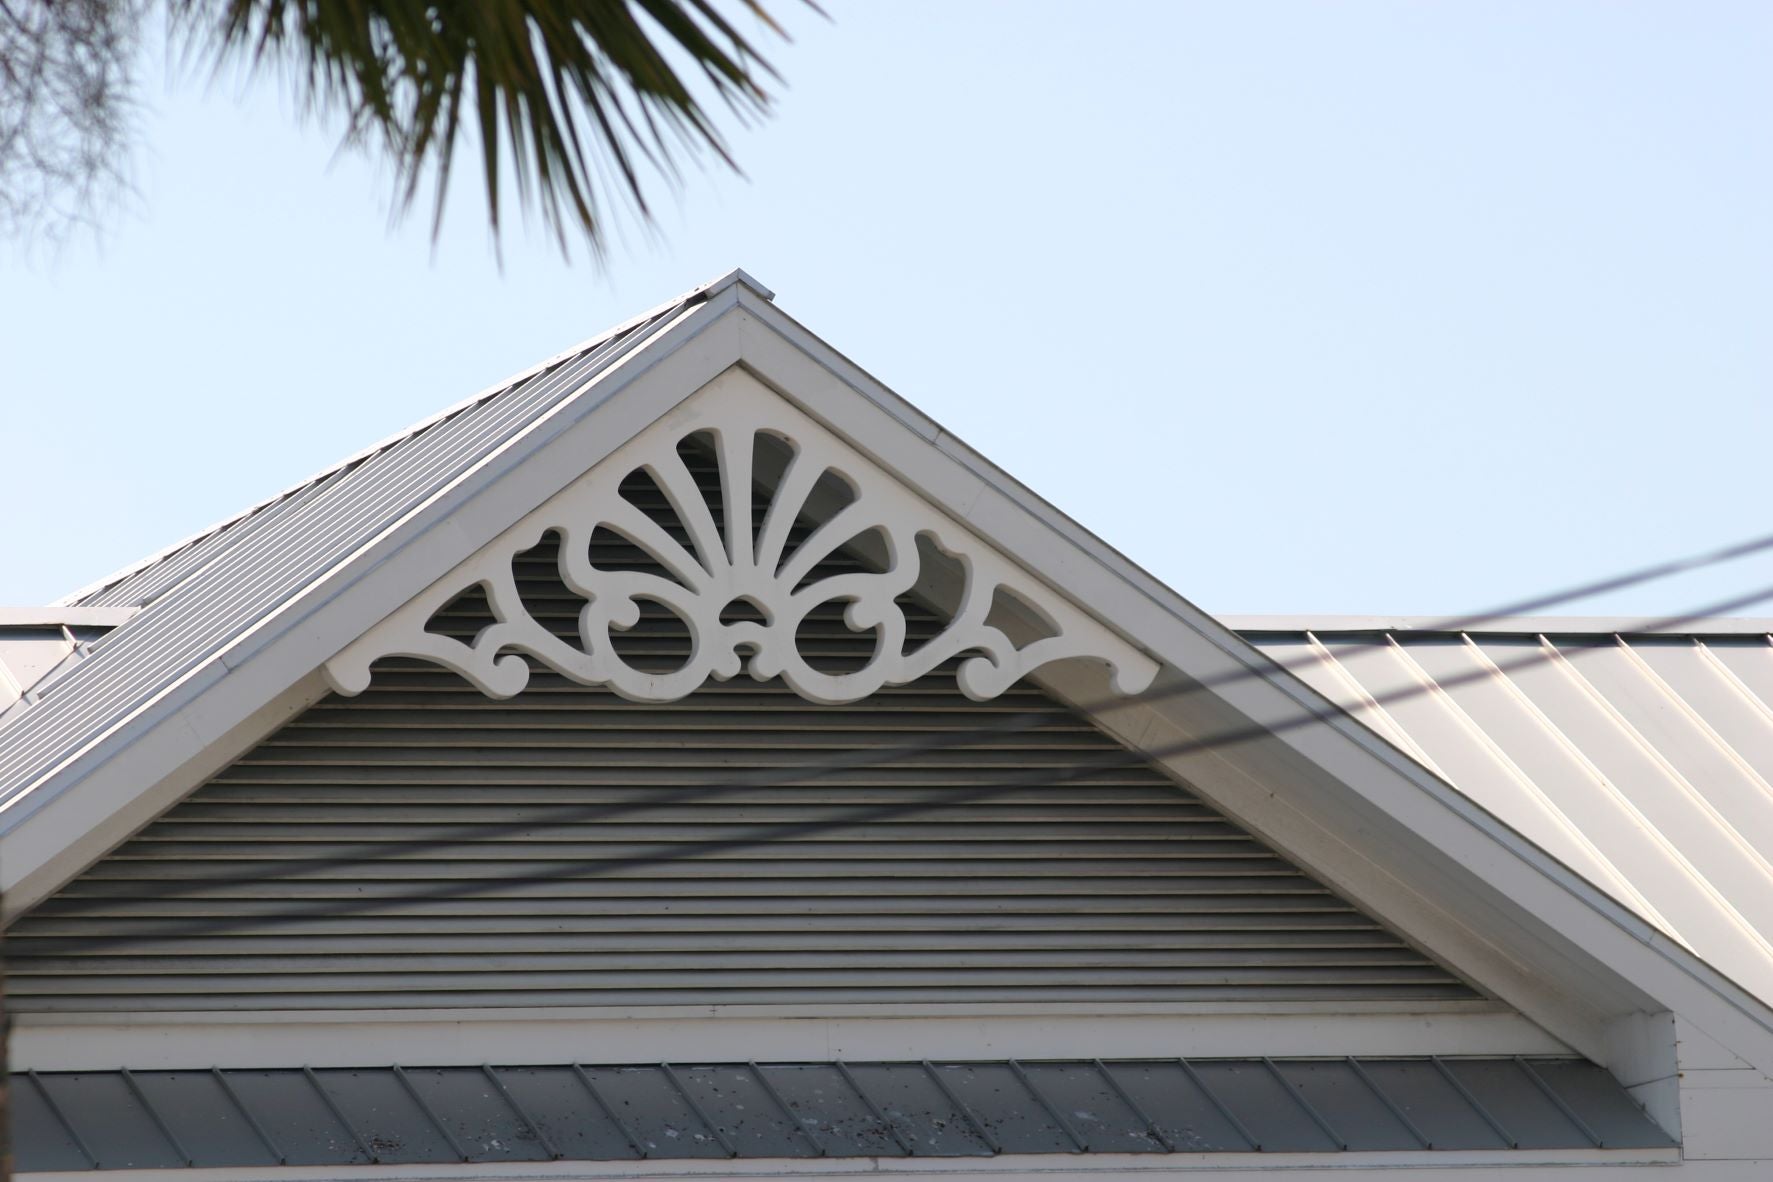 This is a close-up image of white gingerbread gable trim with a simplistic design.